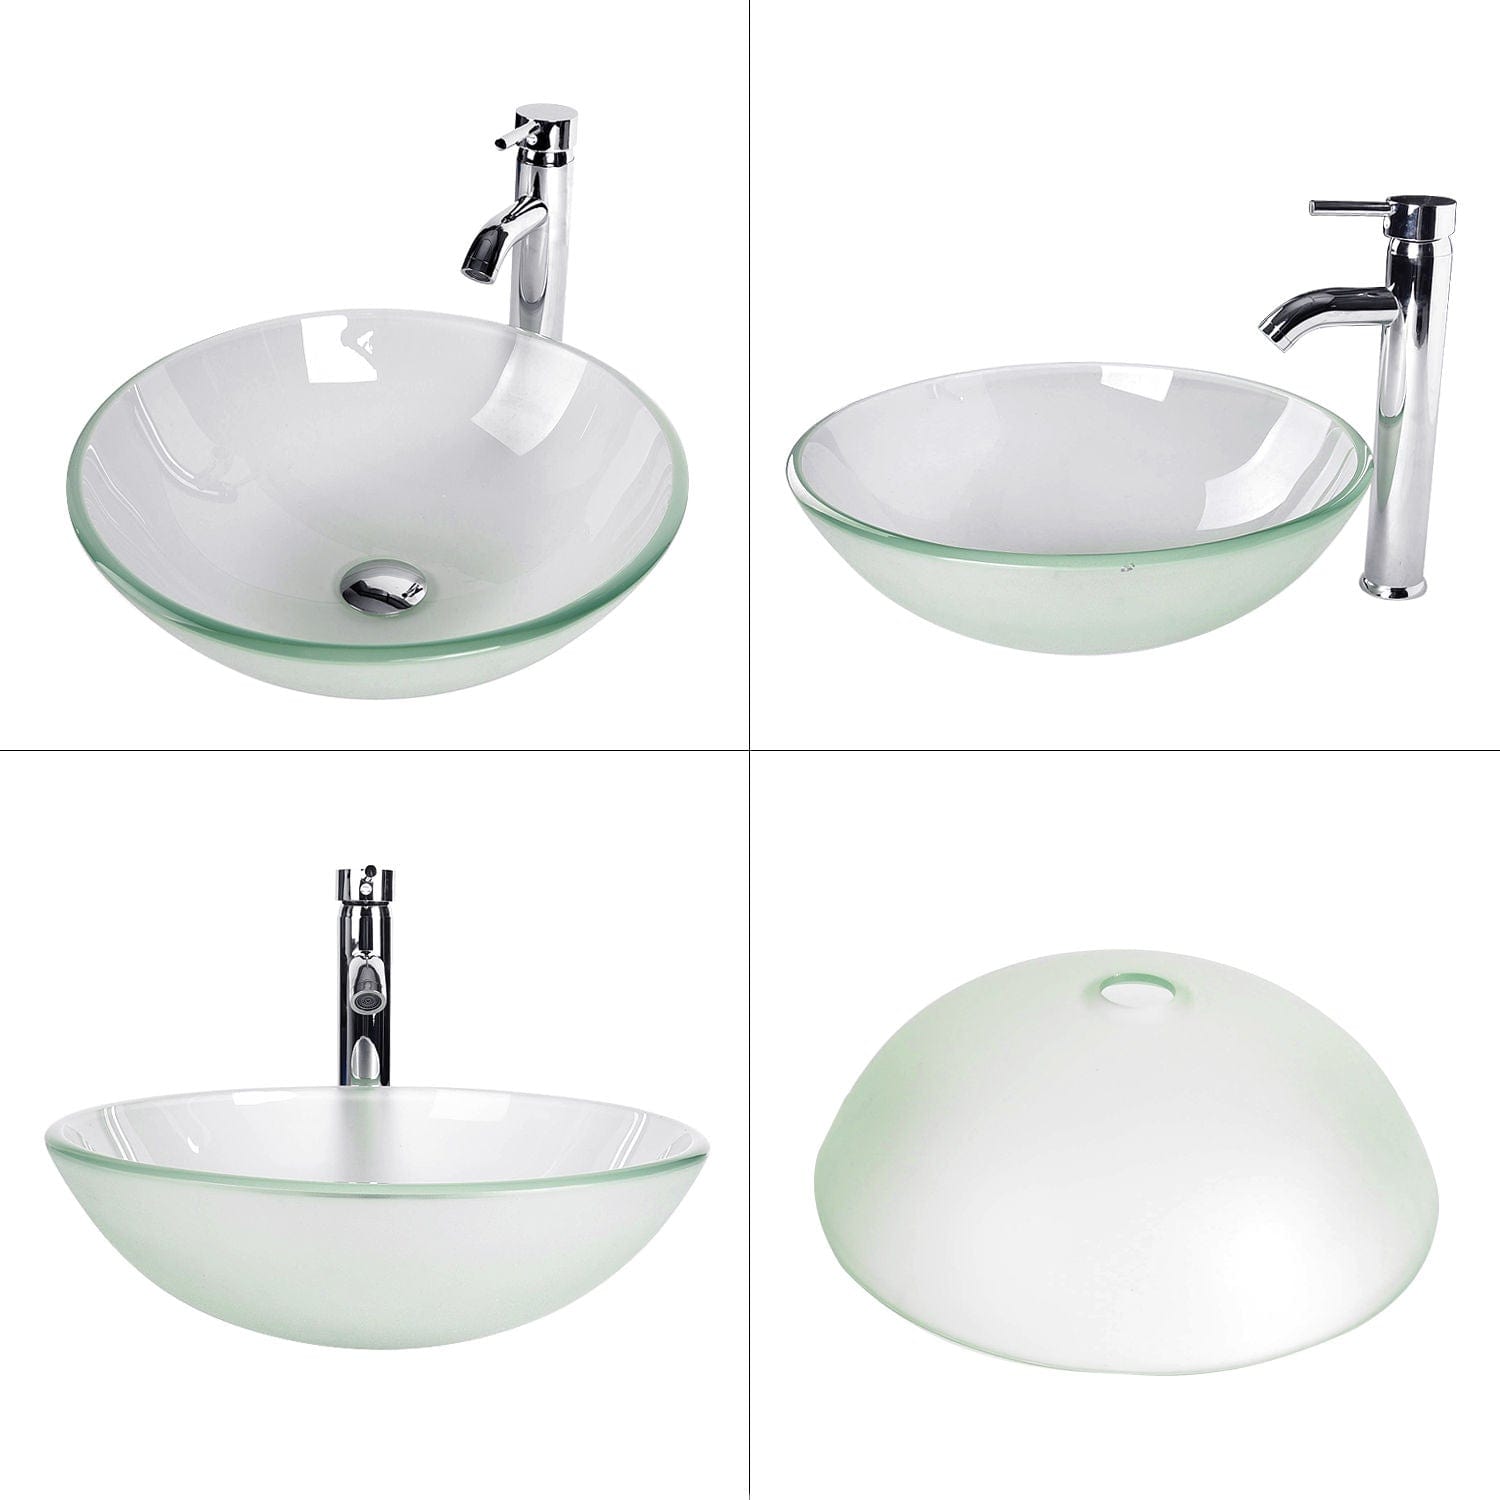 Four different views of Elecwish Glass Vessel Bathroom Sink Round Bowl Faucet Drain Combo